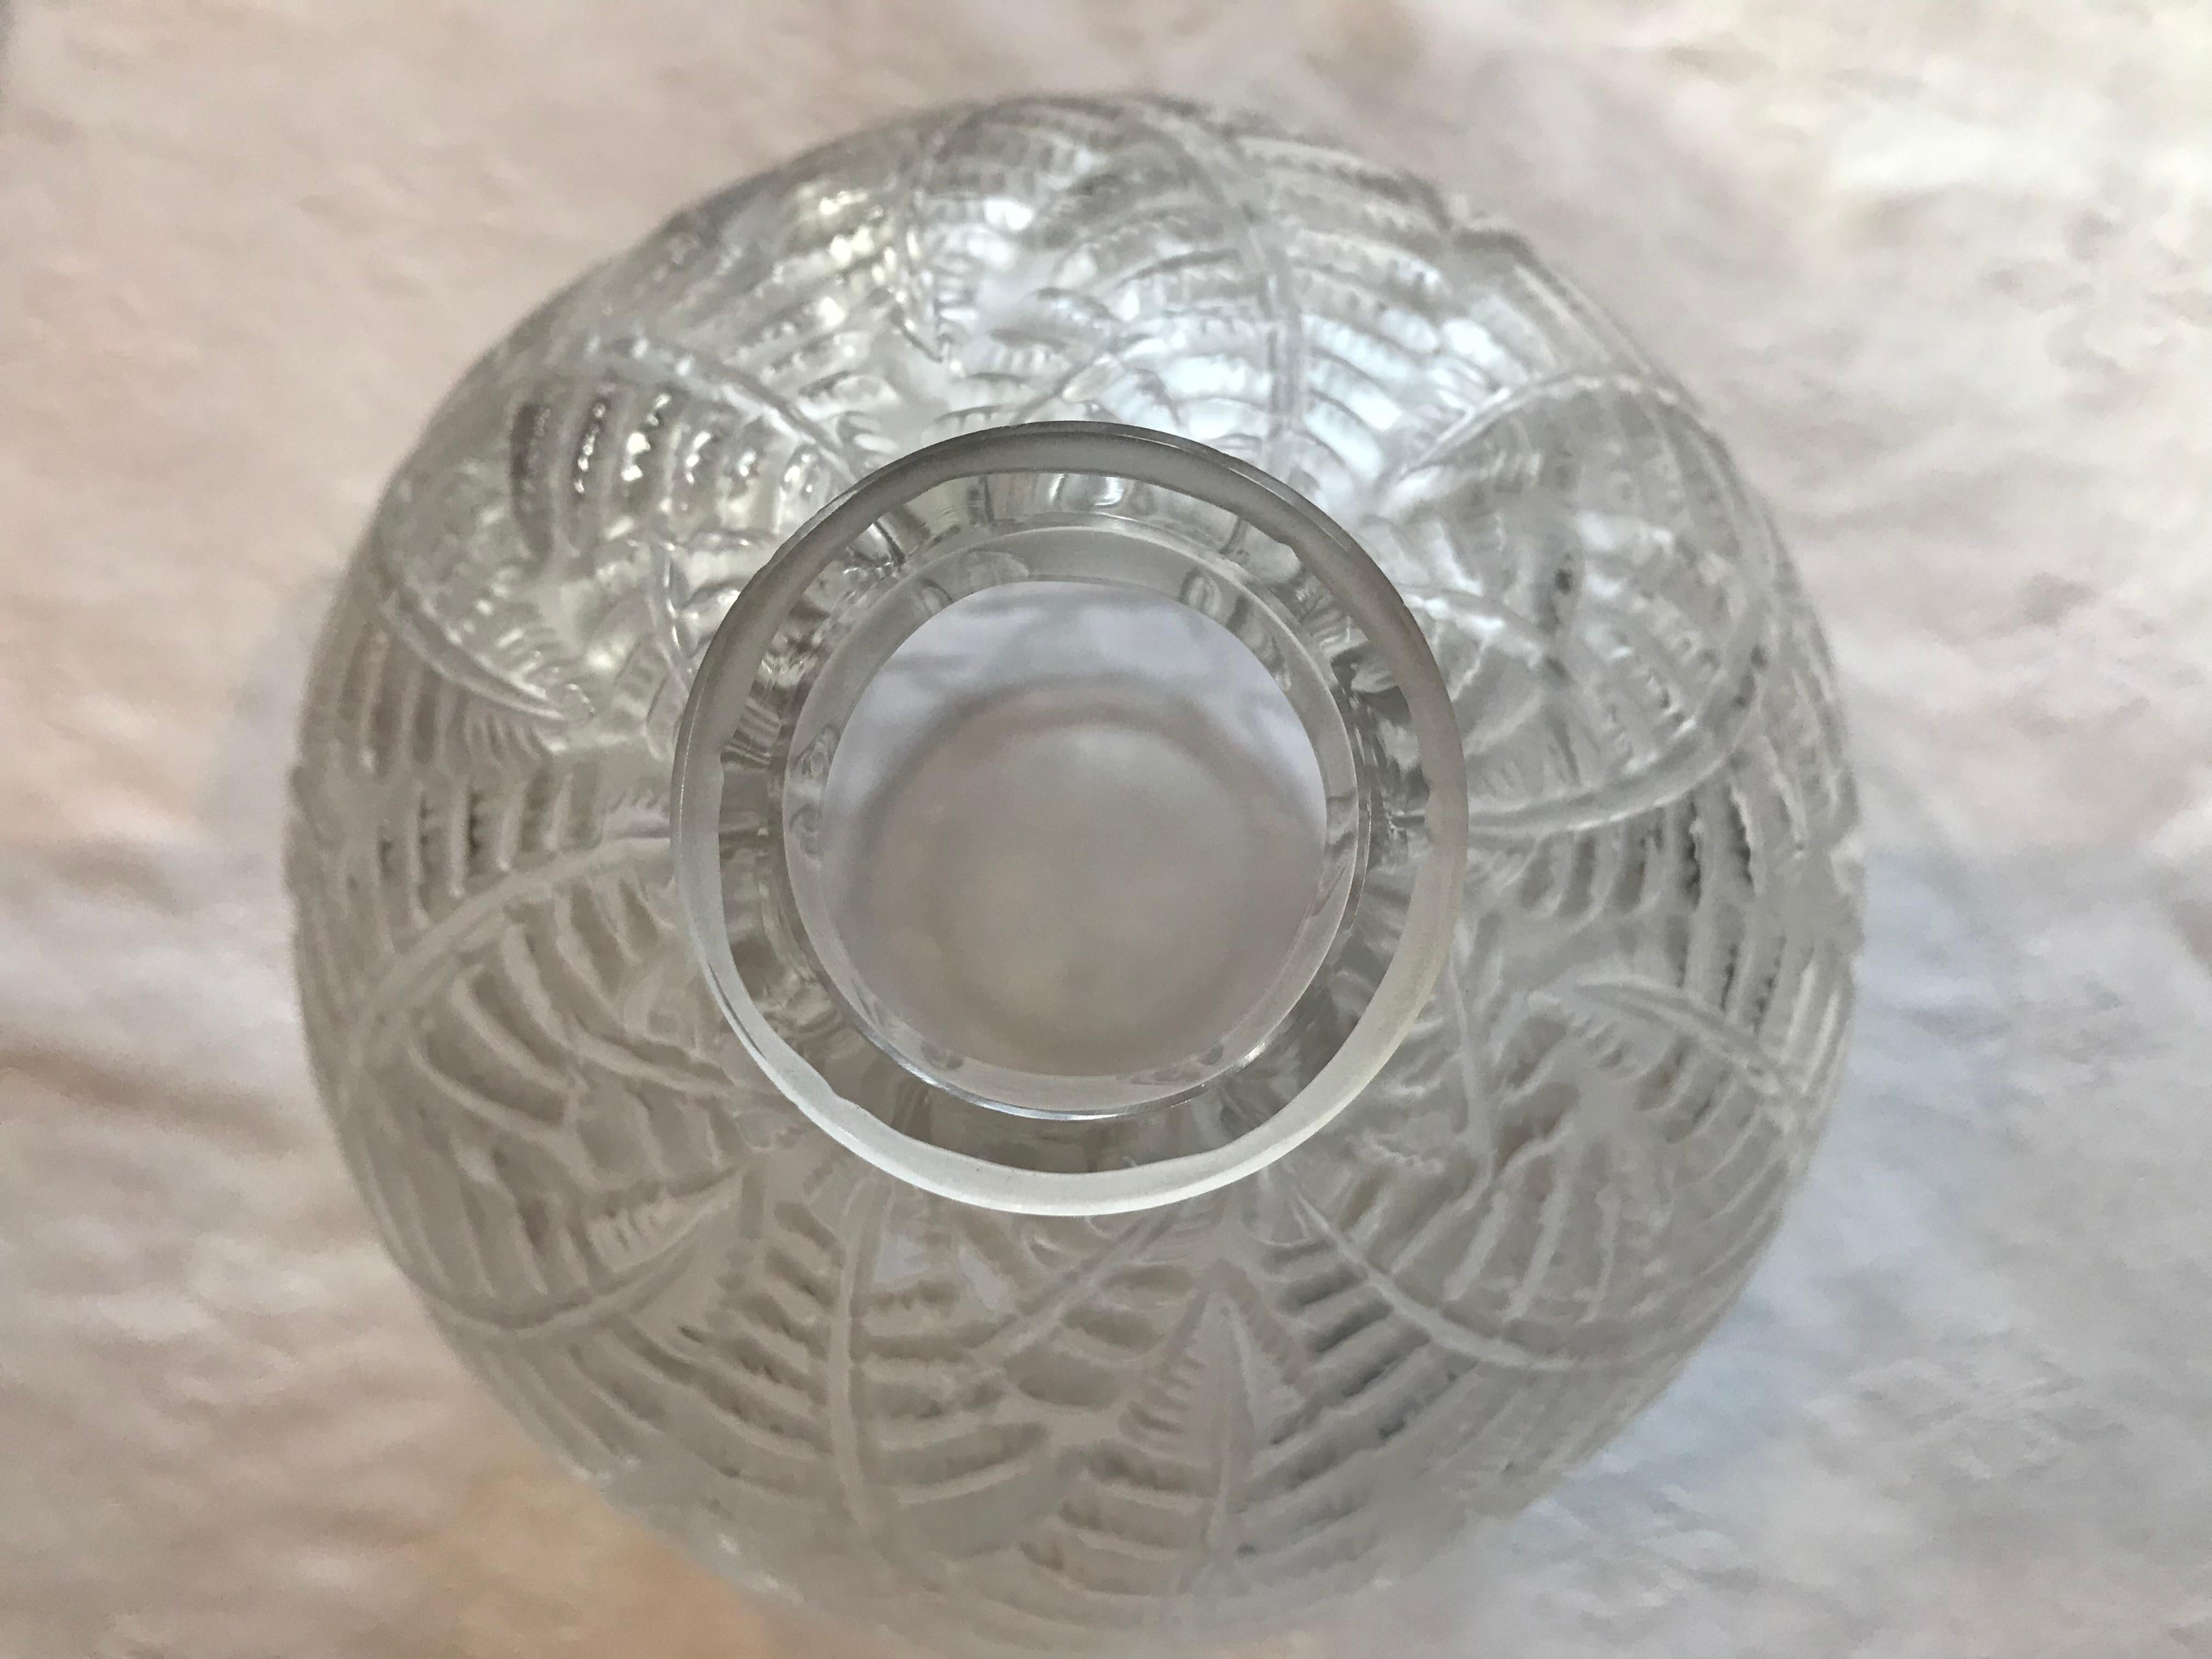 The naturalistic theme of ferns is pressed into a Classic, round 8” Lalique souffle-moule vase. Frosted clear glass. 

This exquisite round vase is also called “fougeres” or bracken.

Signed “R. Lalique France”. Model 996. Production of this